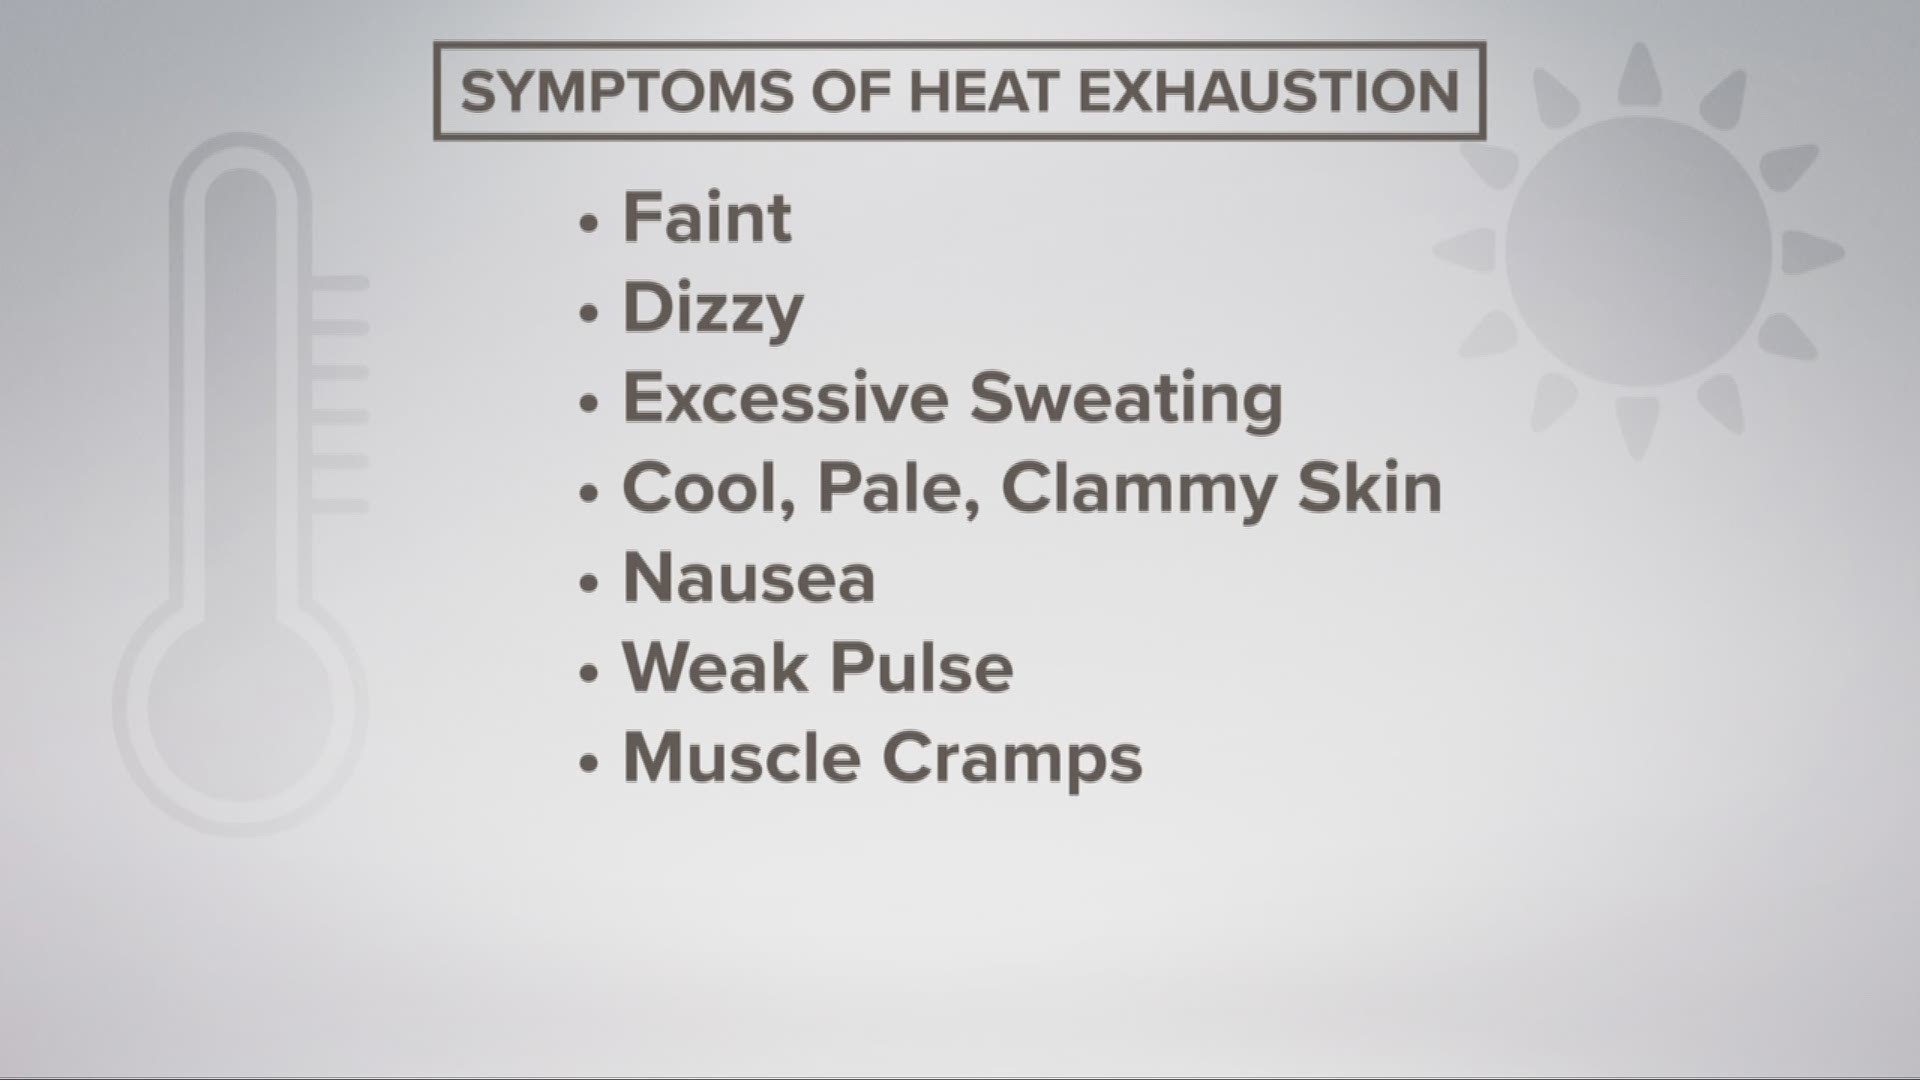 Know the symptoms of heat exhaustion and heat stroke